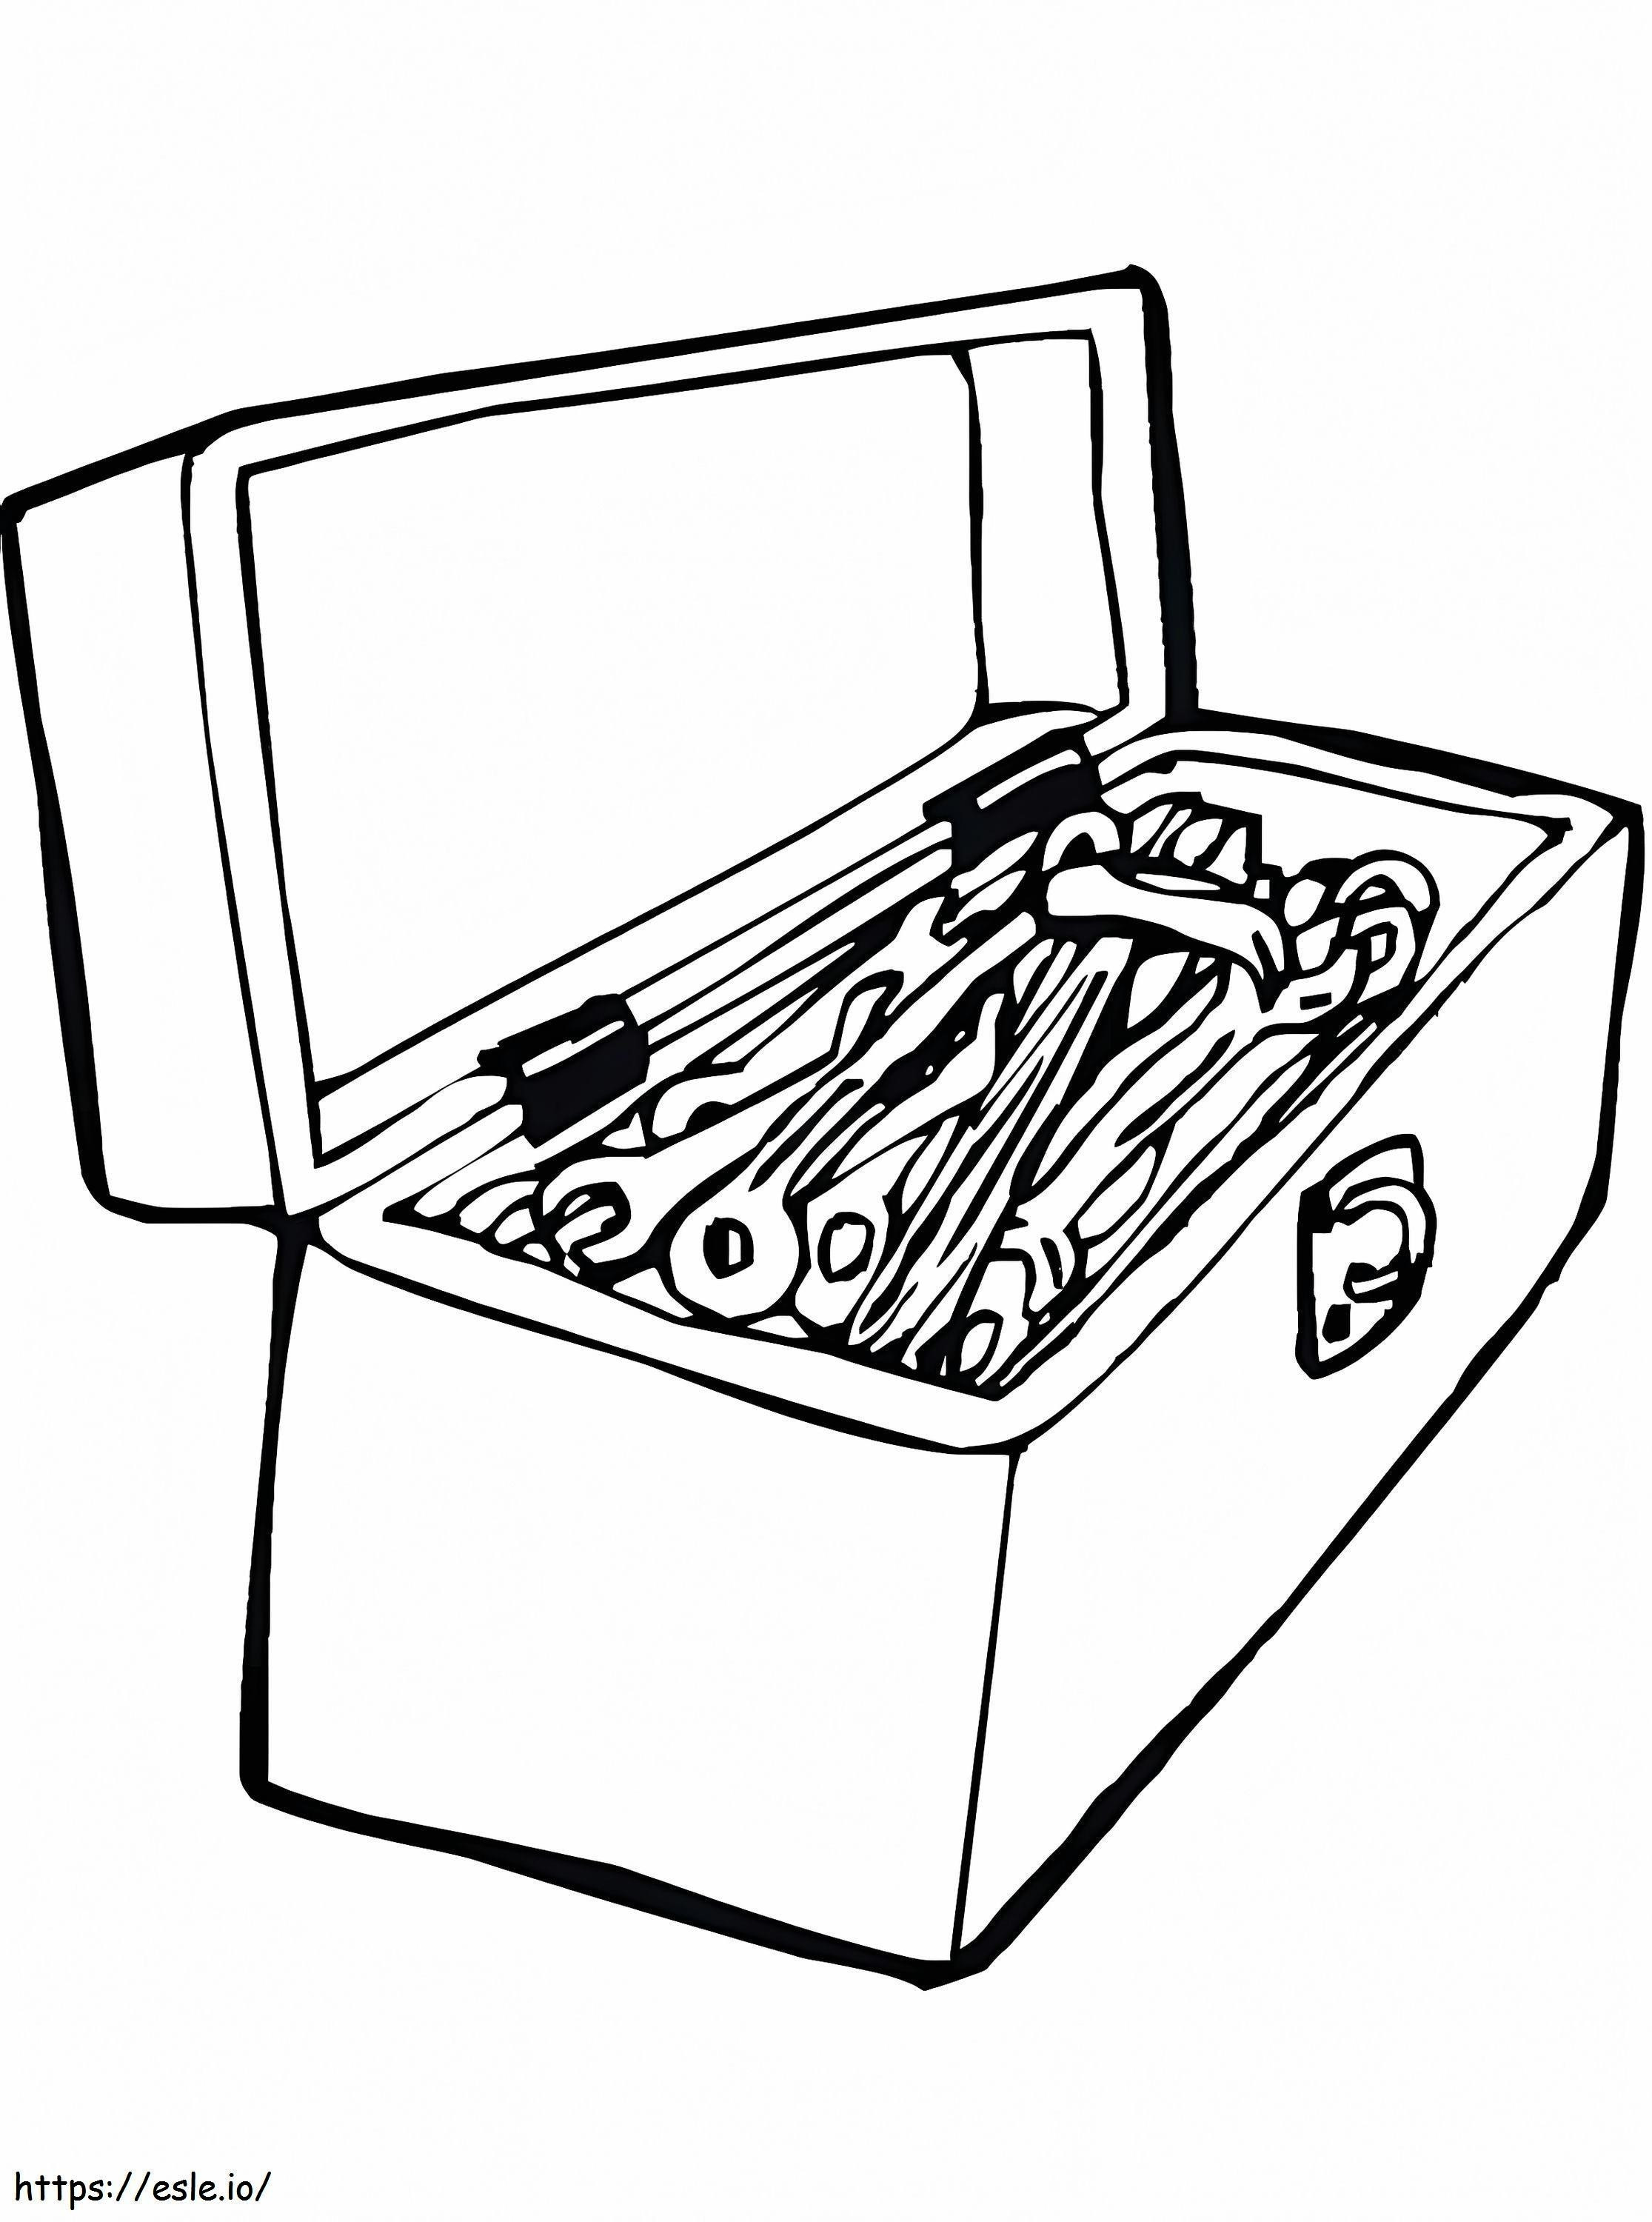 Toolbox coloring page